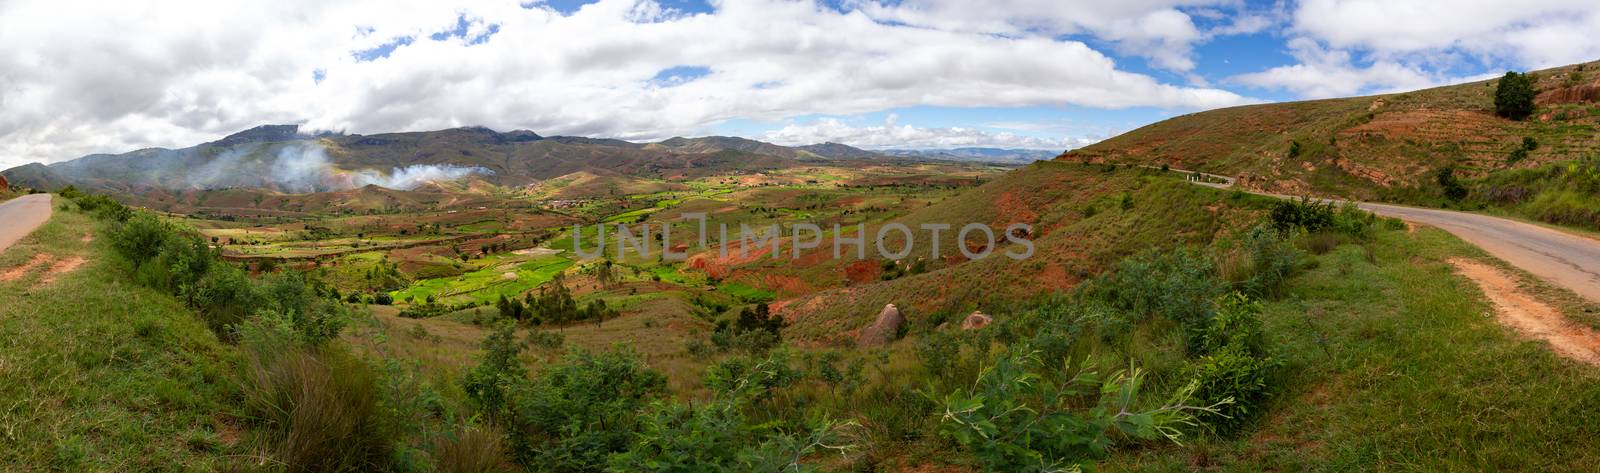 The Landscape shots of green fields and landscapes on the island of Madagascar